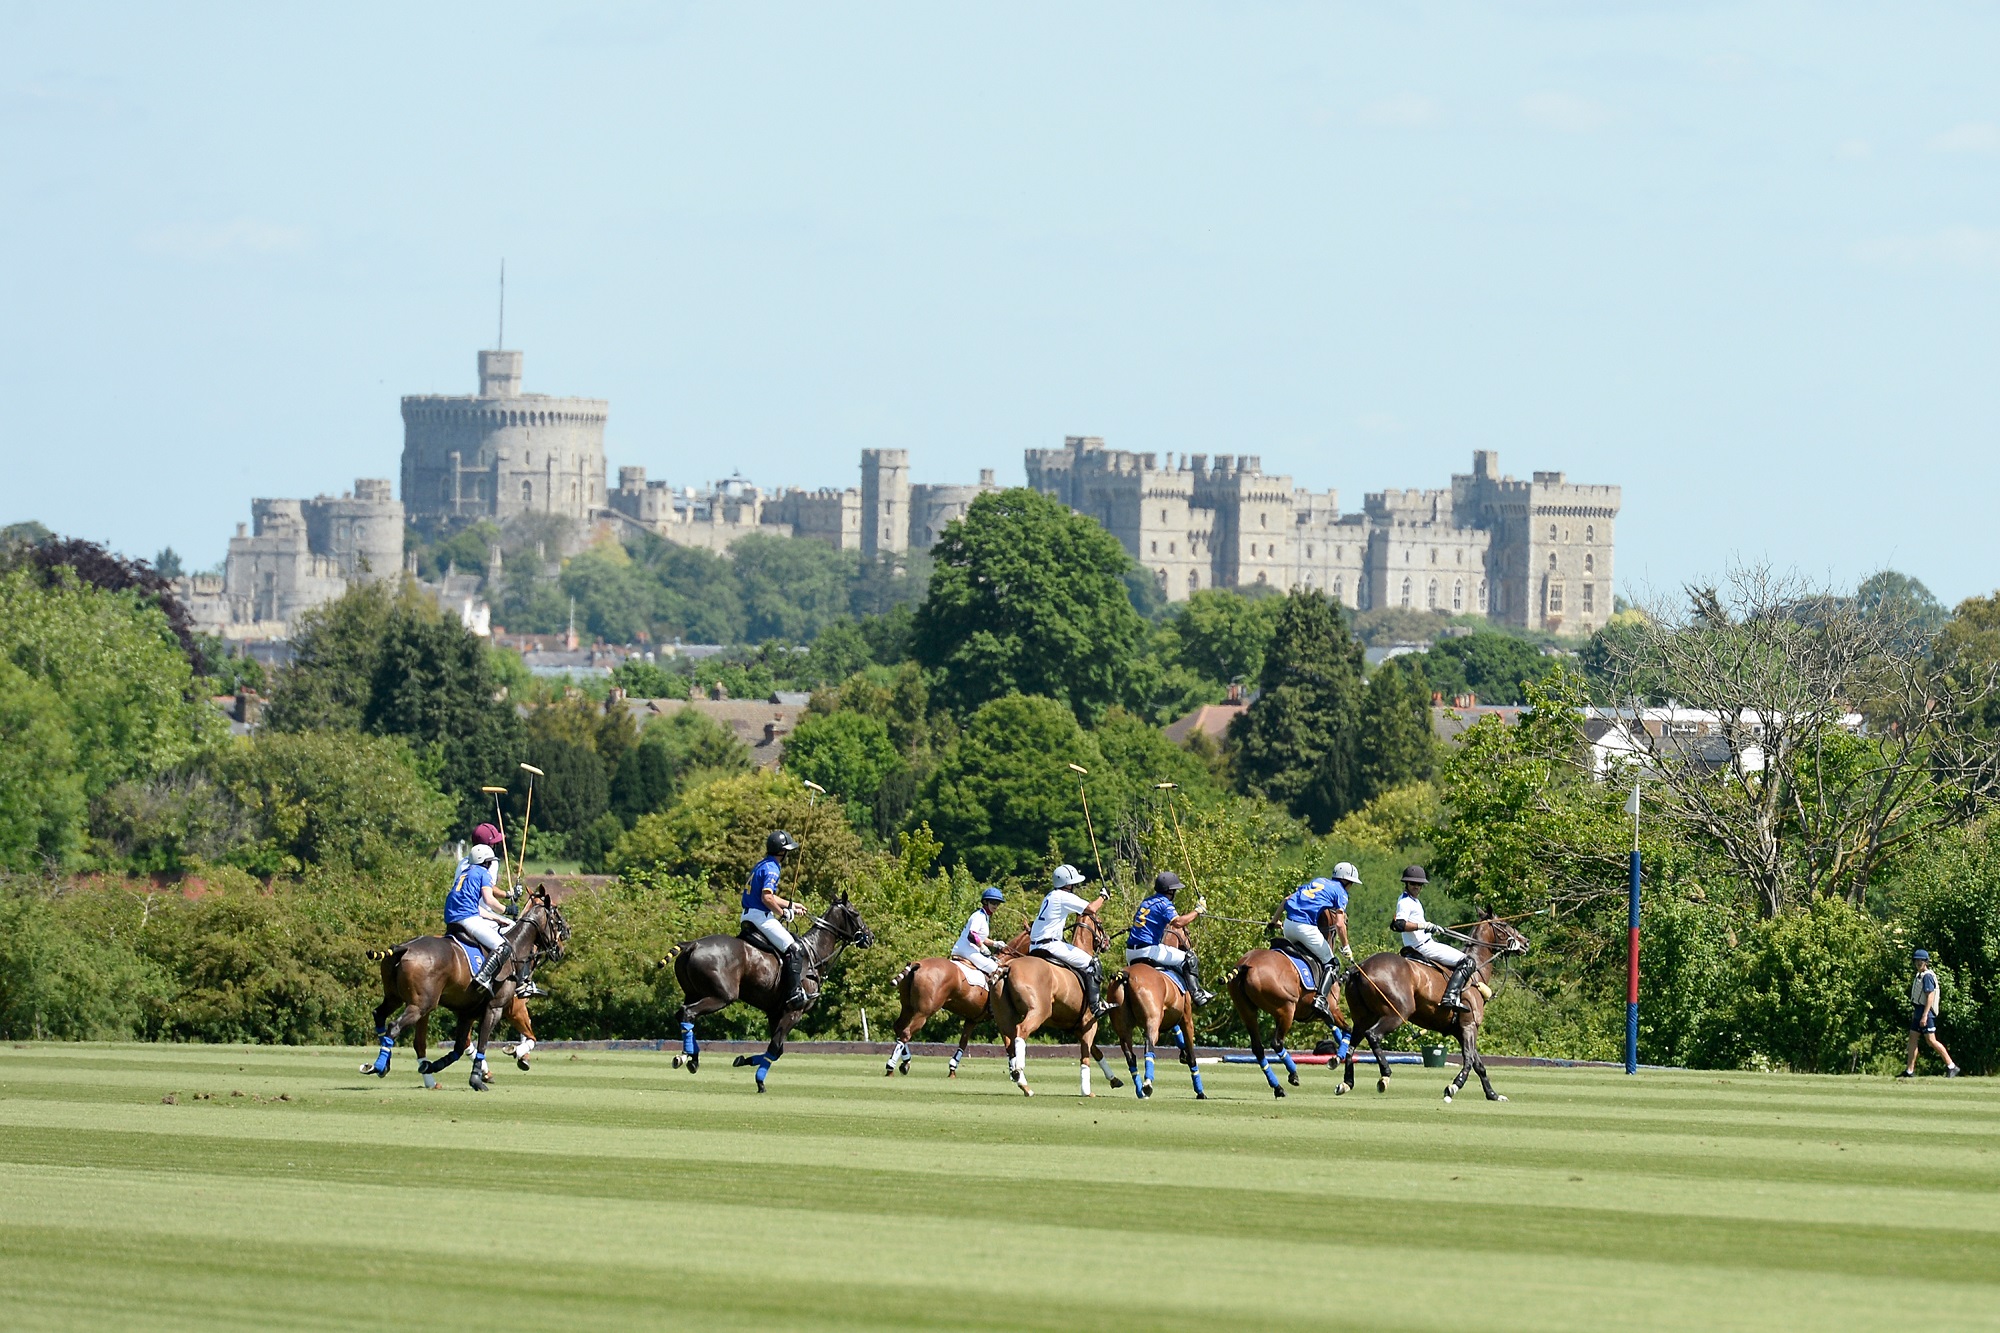 Guard's Polo Club. Polo players on their horses with Windsor Castle in the background.